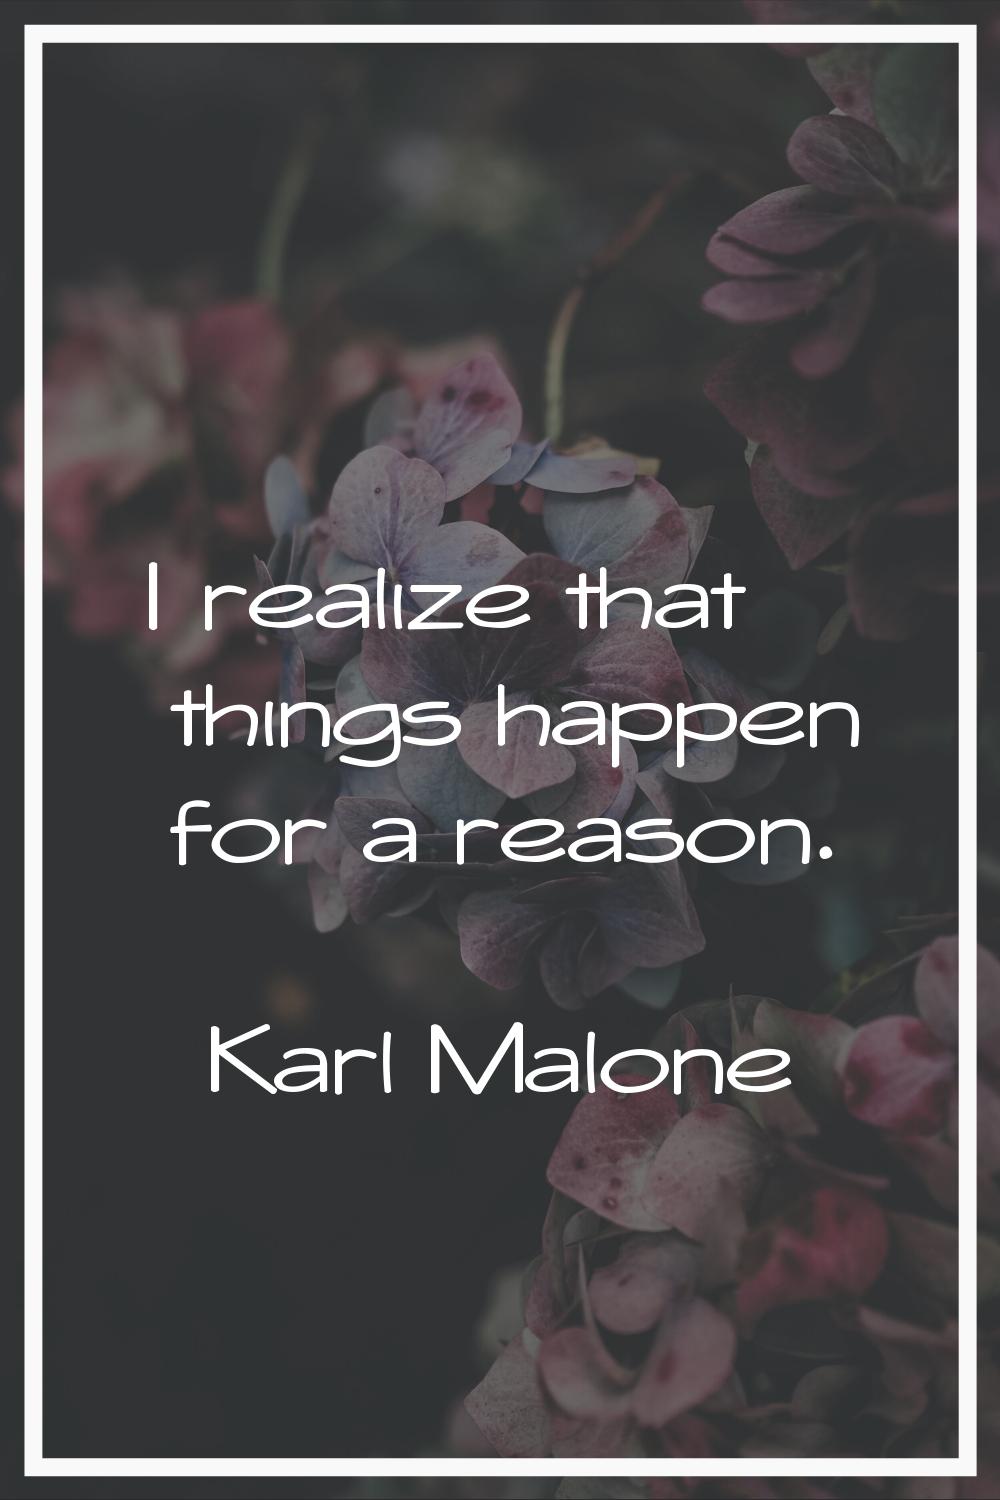 I realize that things happen for a reason.